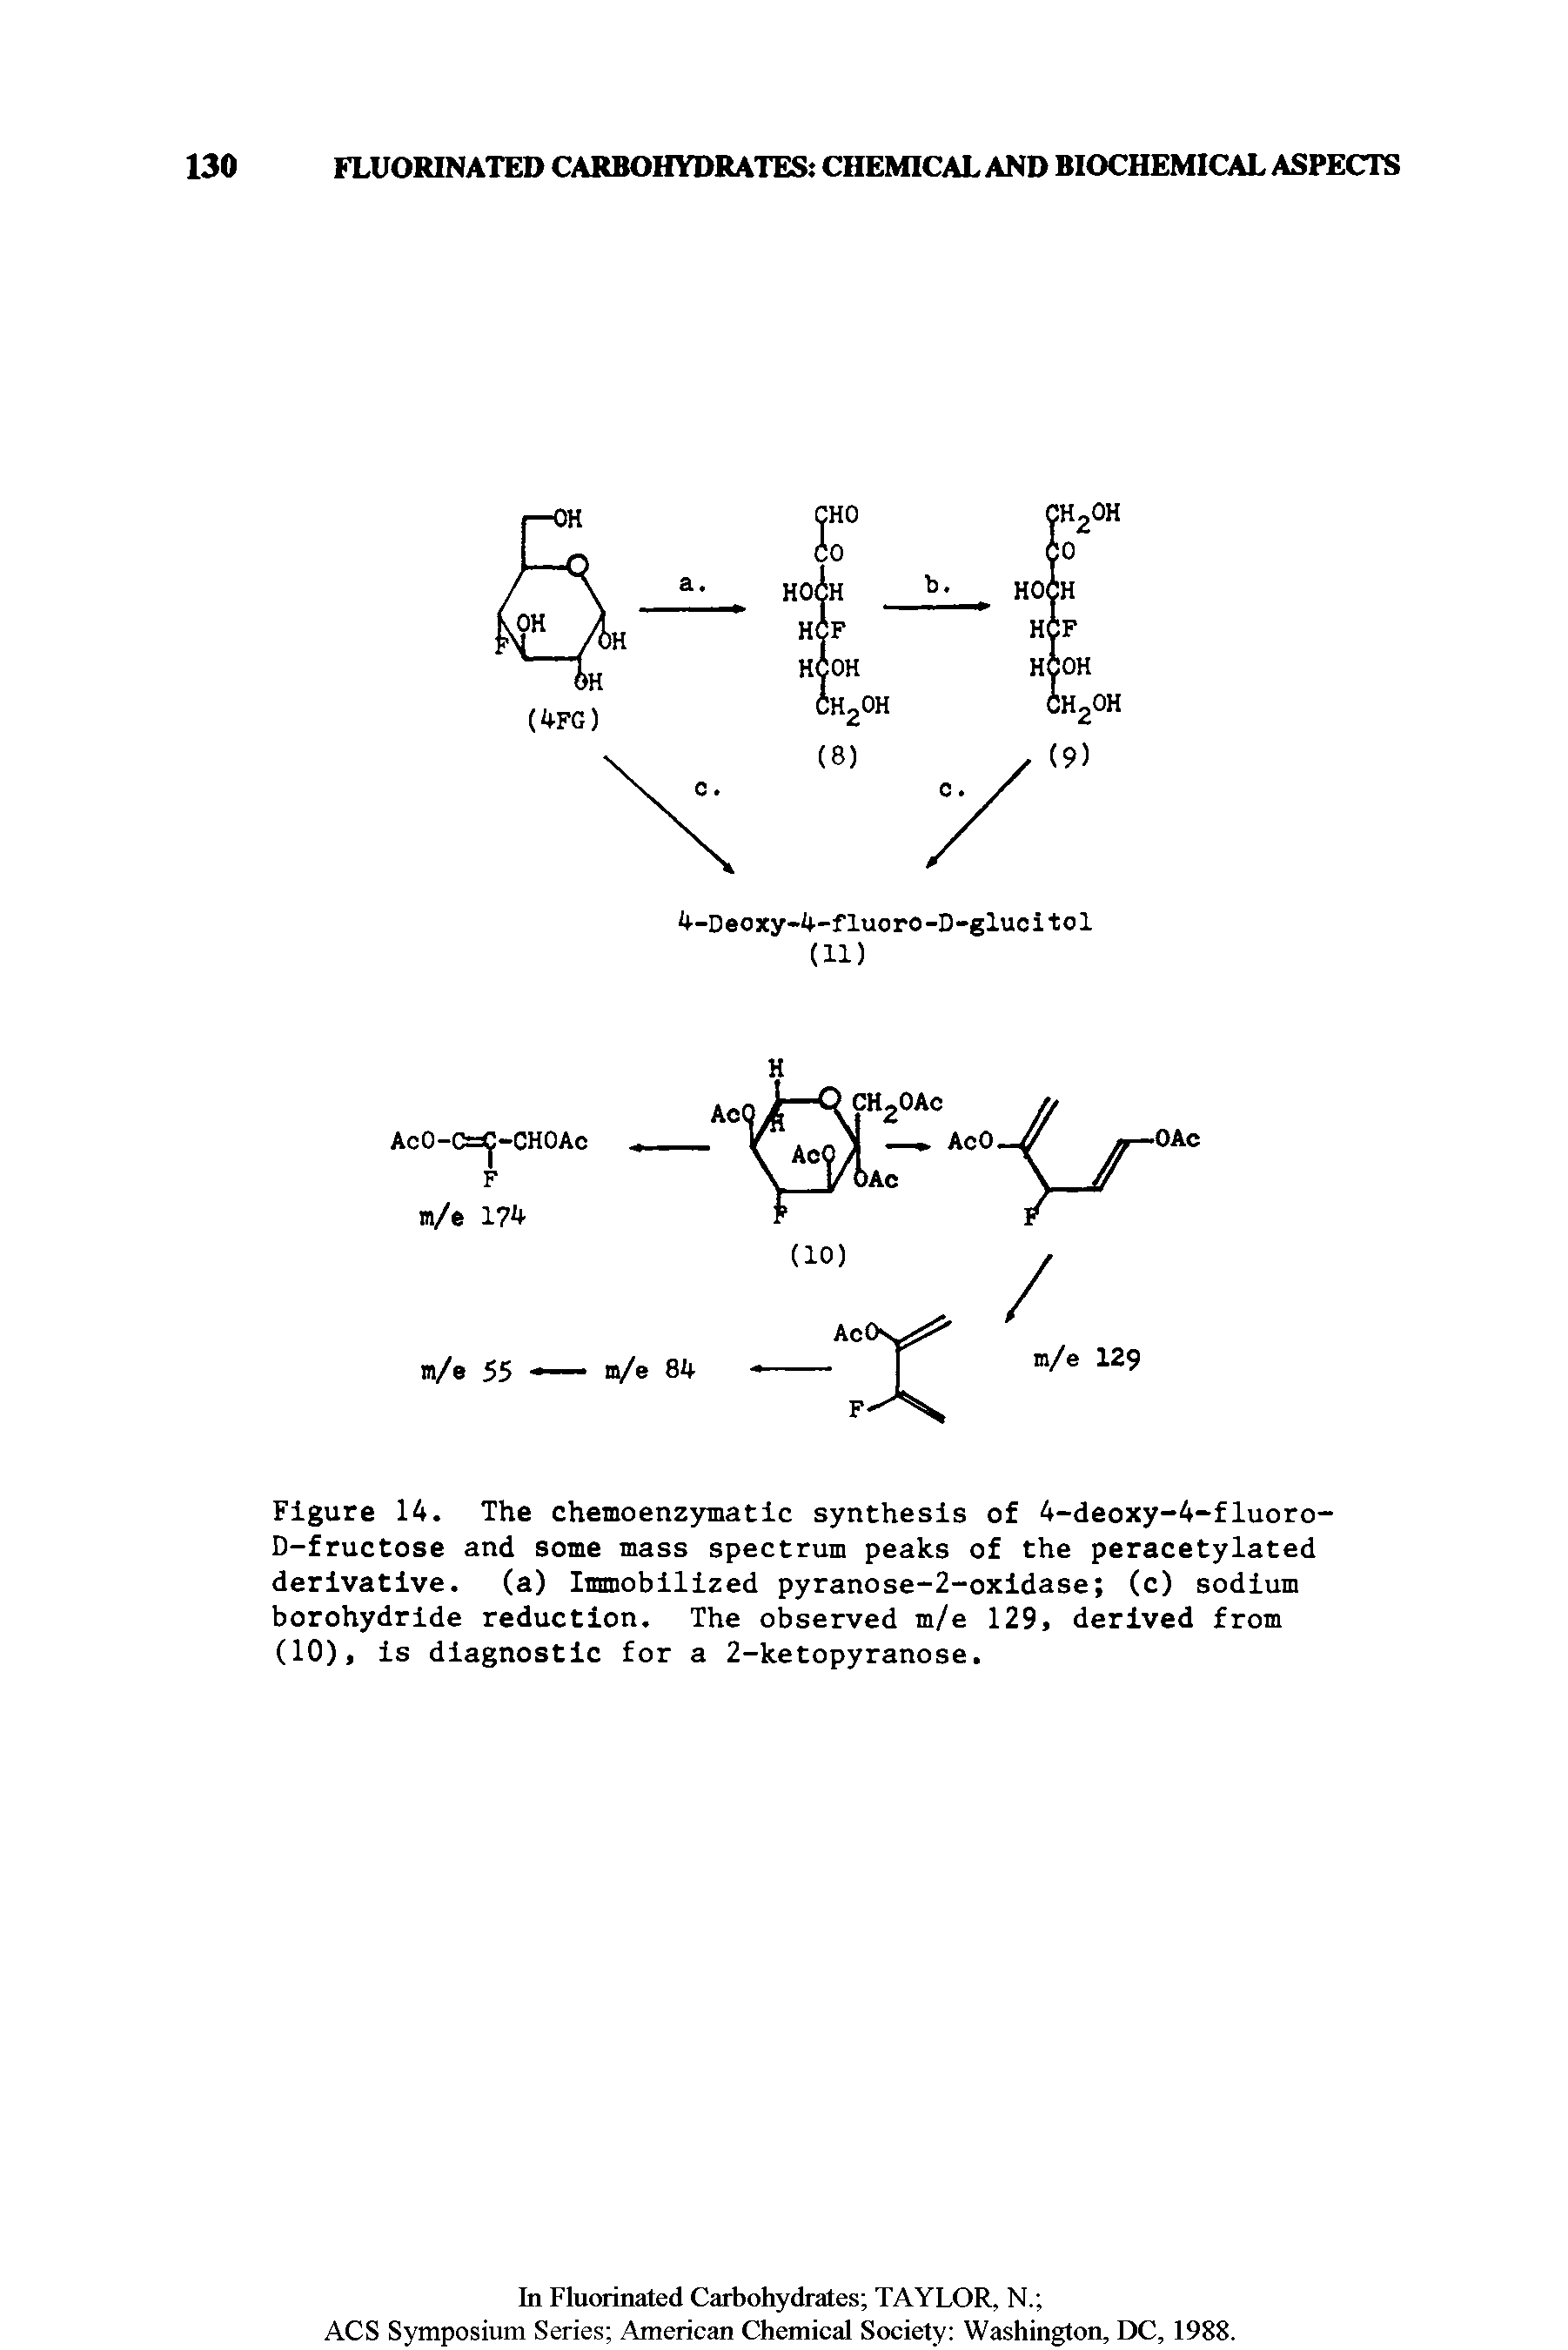 Figure 14. The chemoenzymatic synthesis of 4-deoxy-4-fluoro-D- ructose and some mass spectrum peaks of the peracetylated derivative. (a) Immobilized pyranose-2-oxidase (c) sodium borohydride reduction. The observed m/e 129, derived from (10), is diagnostic for a 2-ketopyranose.